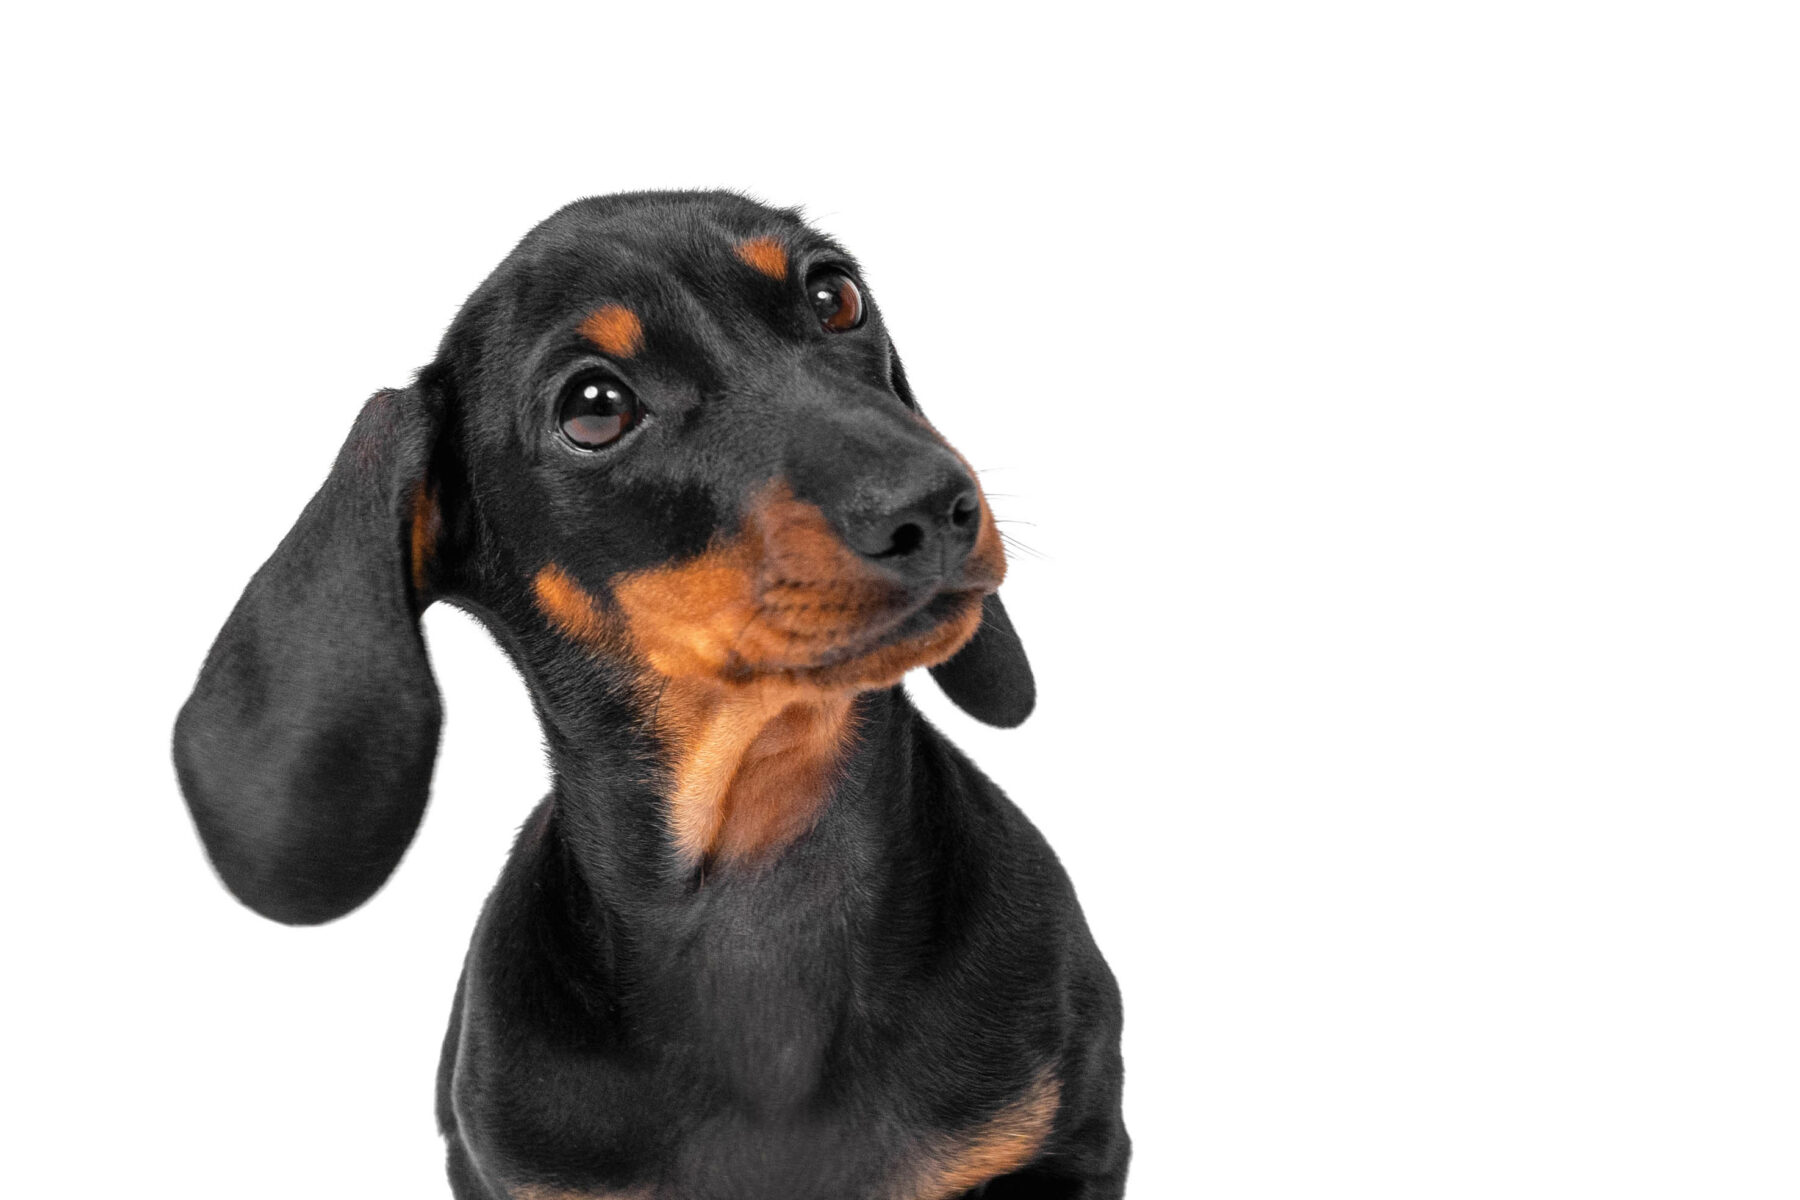 Portrait of adorable dachshund puppy, who obediently sits and listens attentively to someone with its head tilted, funny ear sticking out isolated on white background, front view.